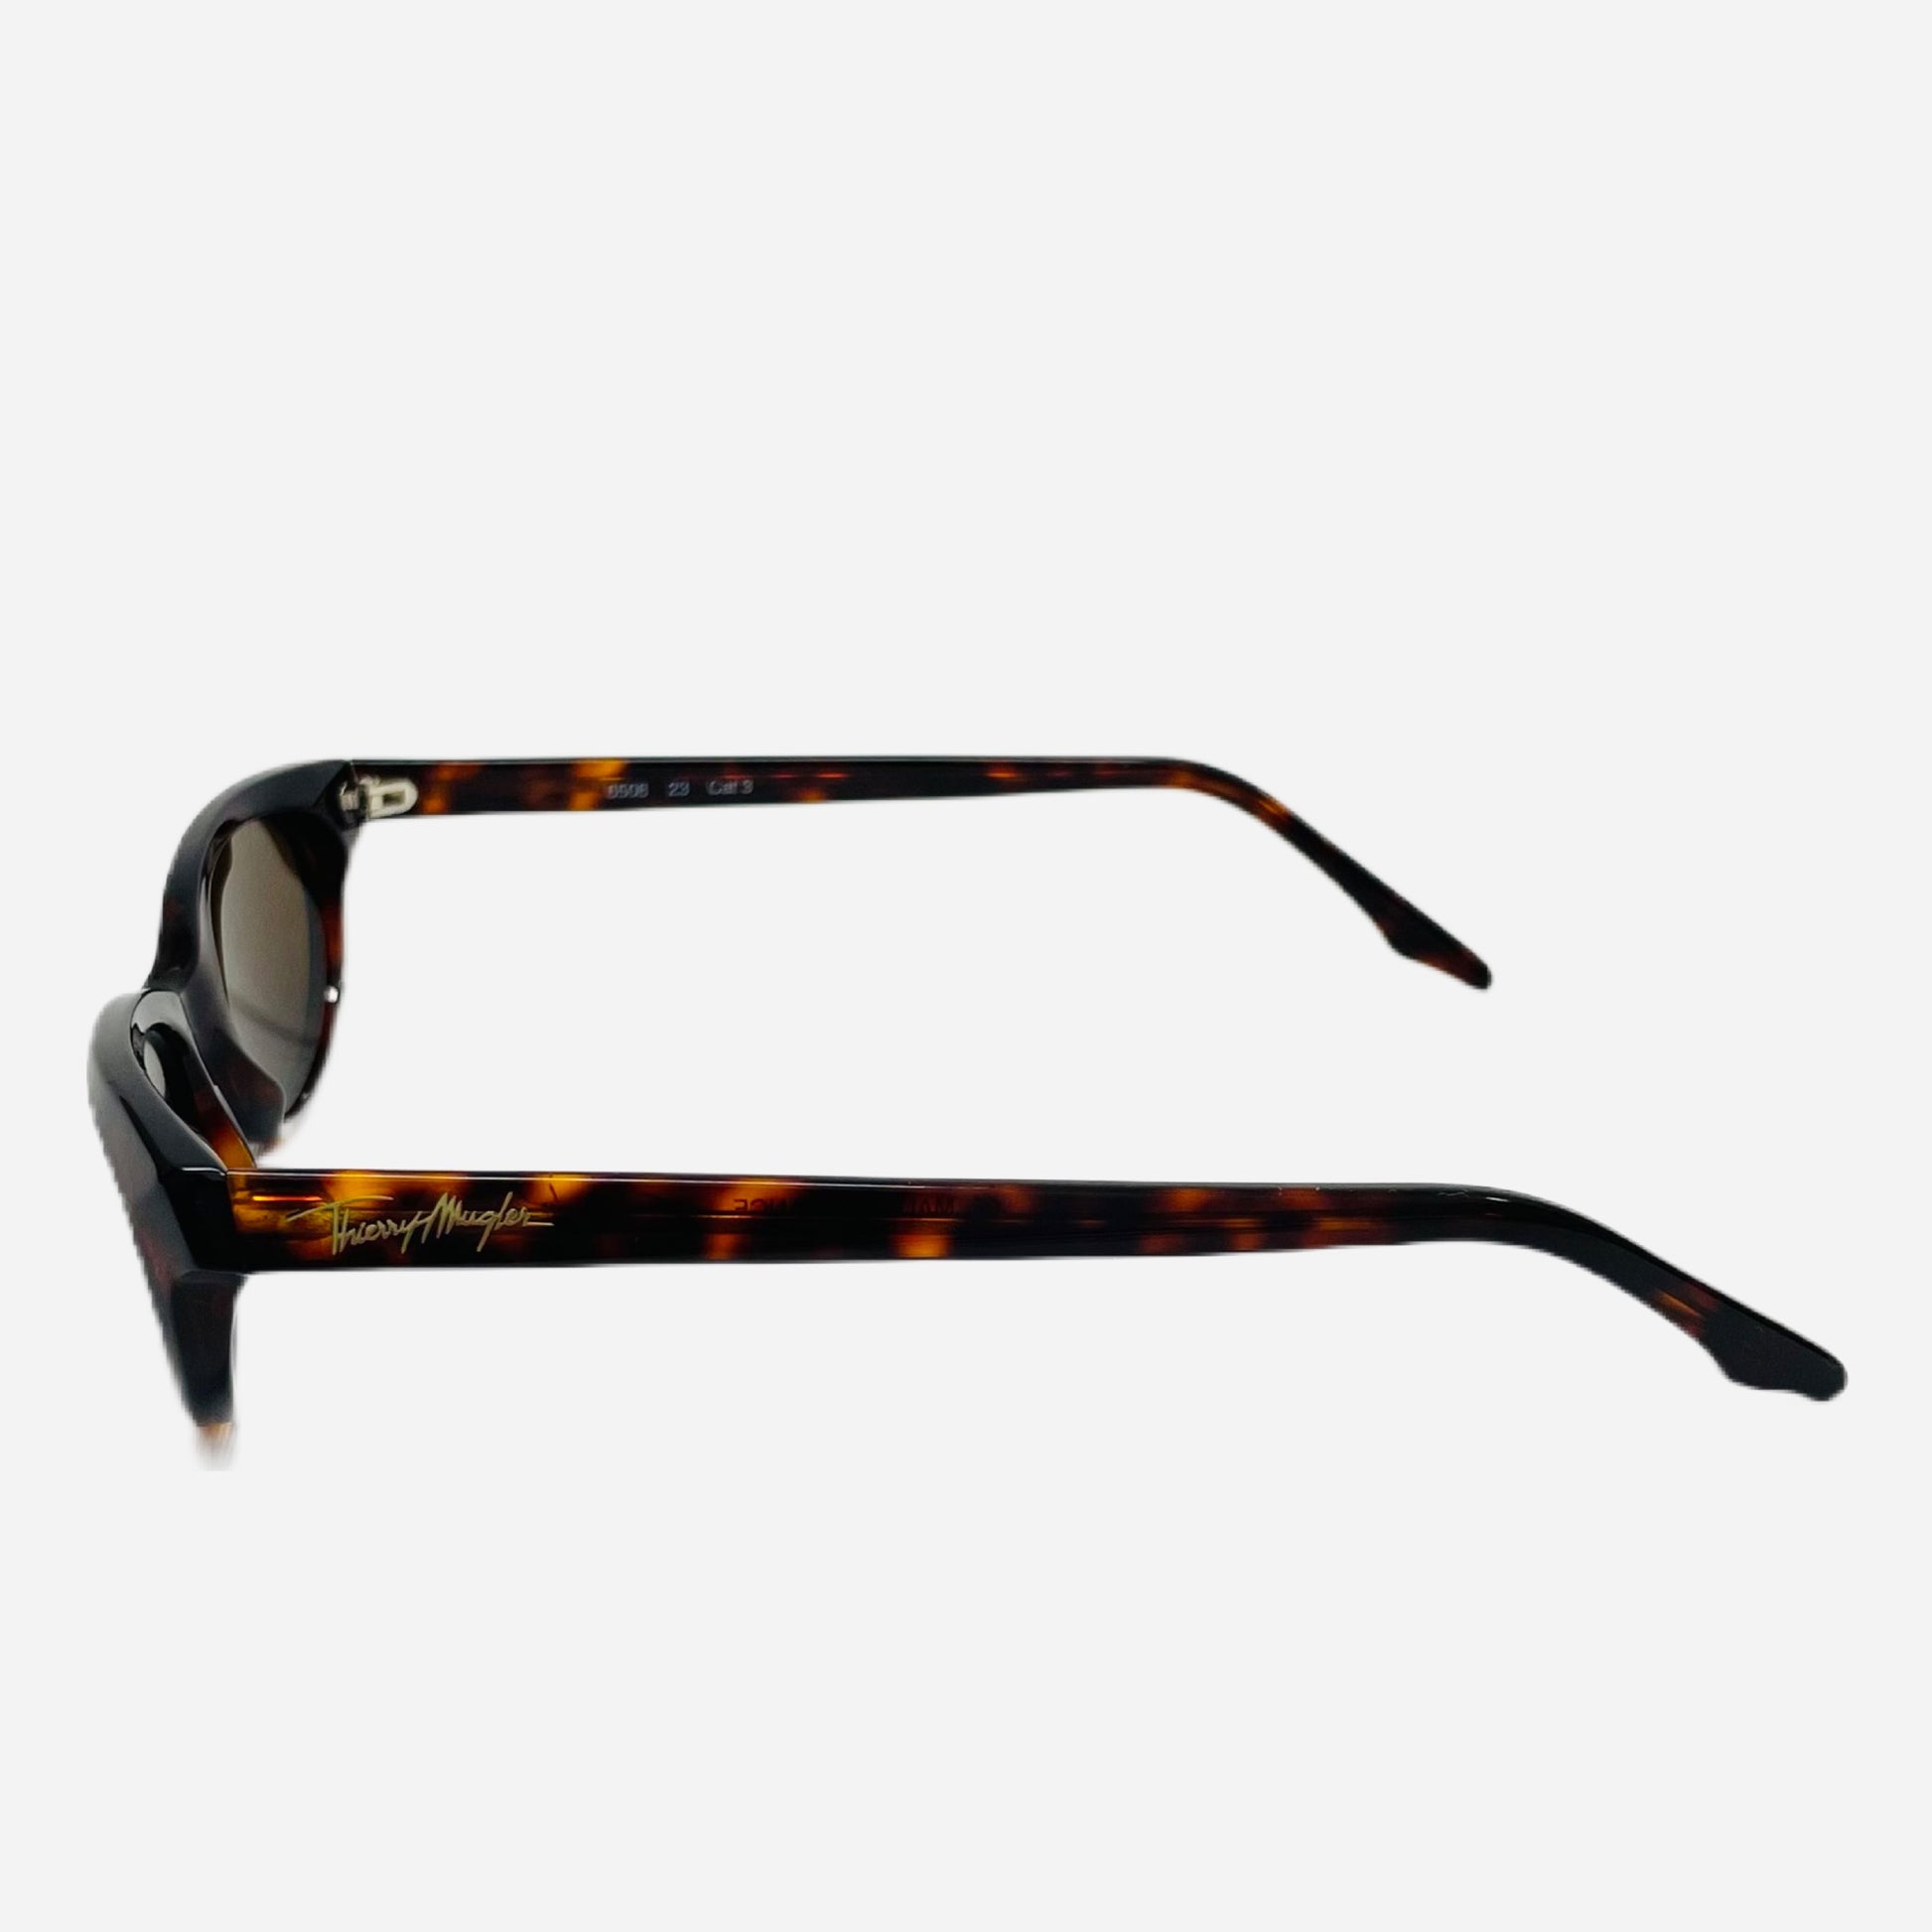 Vintage-Thierry-Mugler-Sonnenbrille-Sunglasses-schnelle-Brille-Modell-6508-the-seekers-side